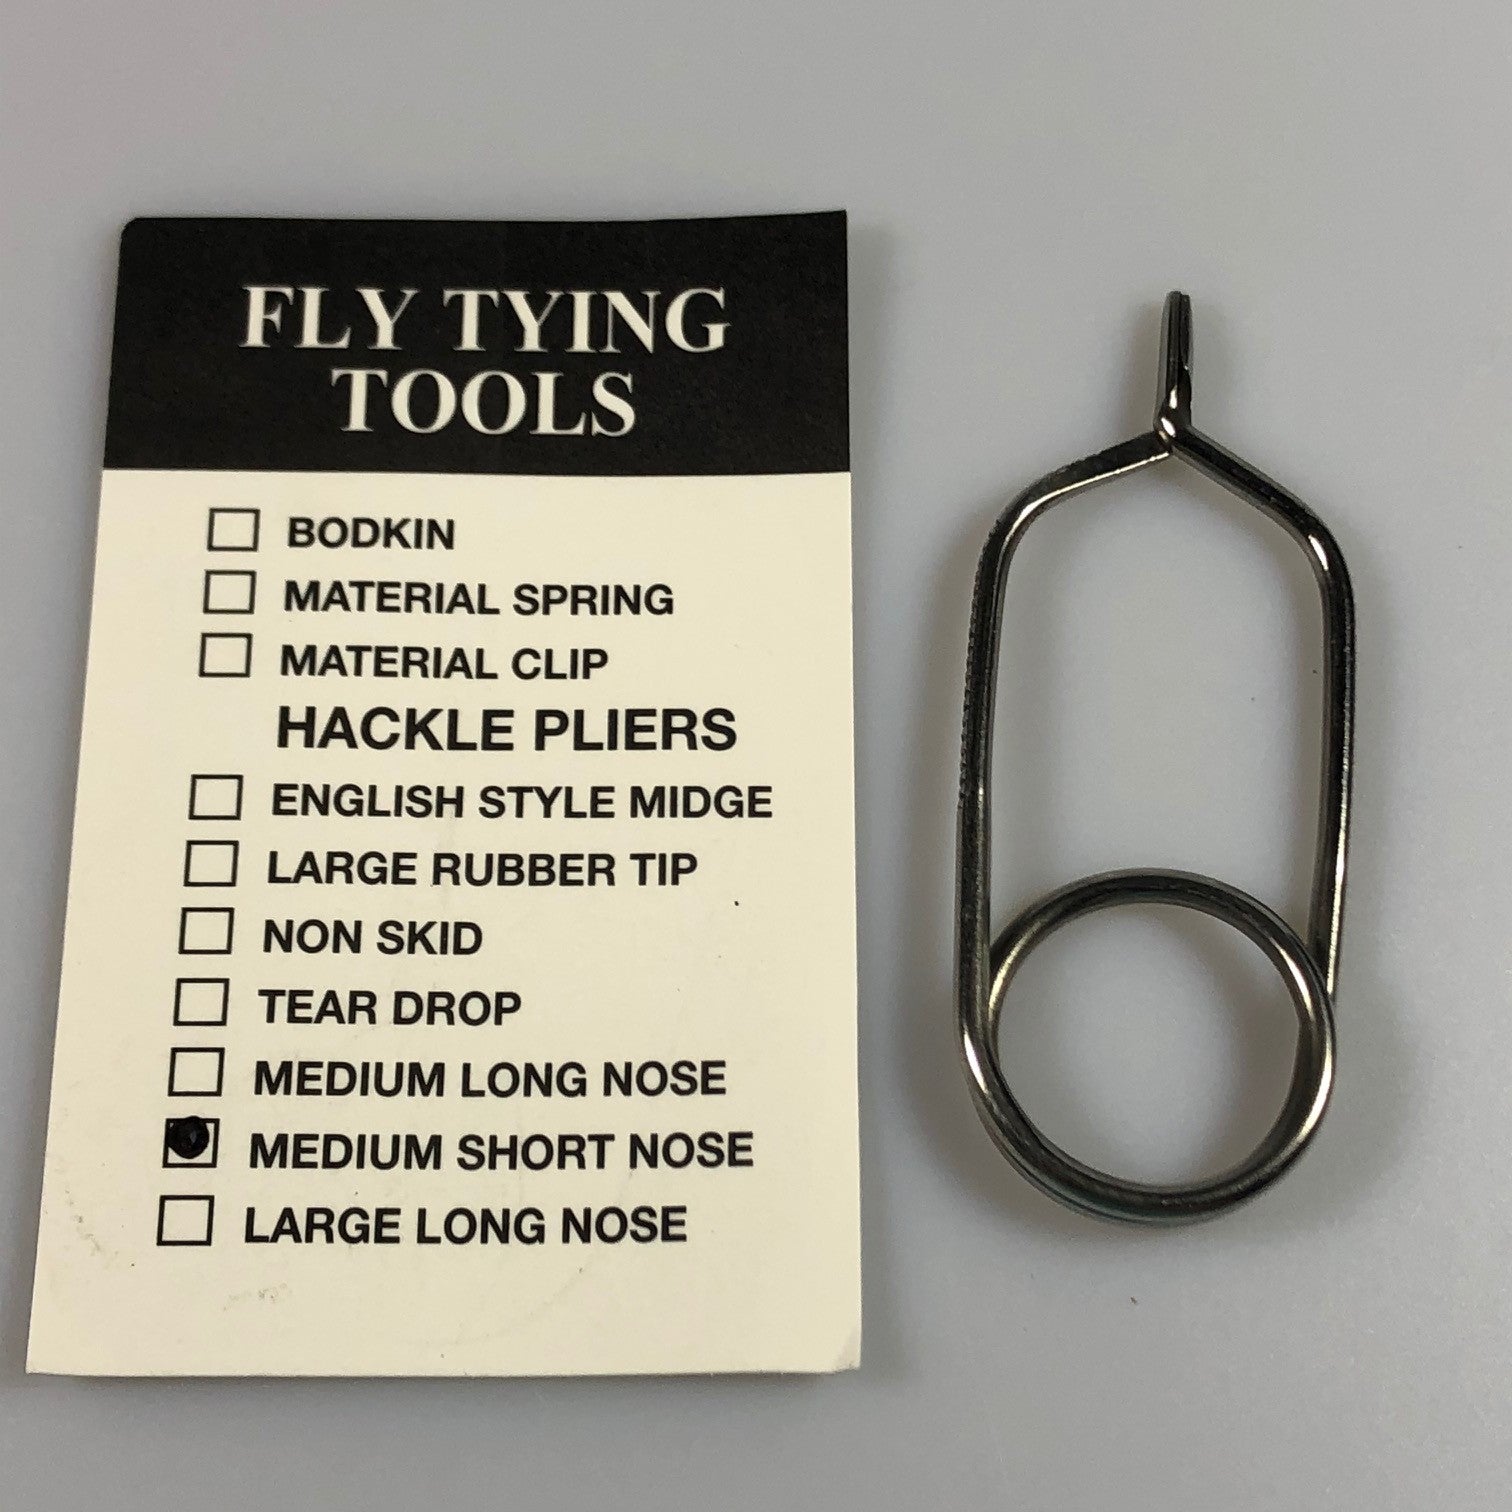 Fly Tying Tools Medium Short Nose Hackle Pliers